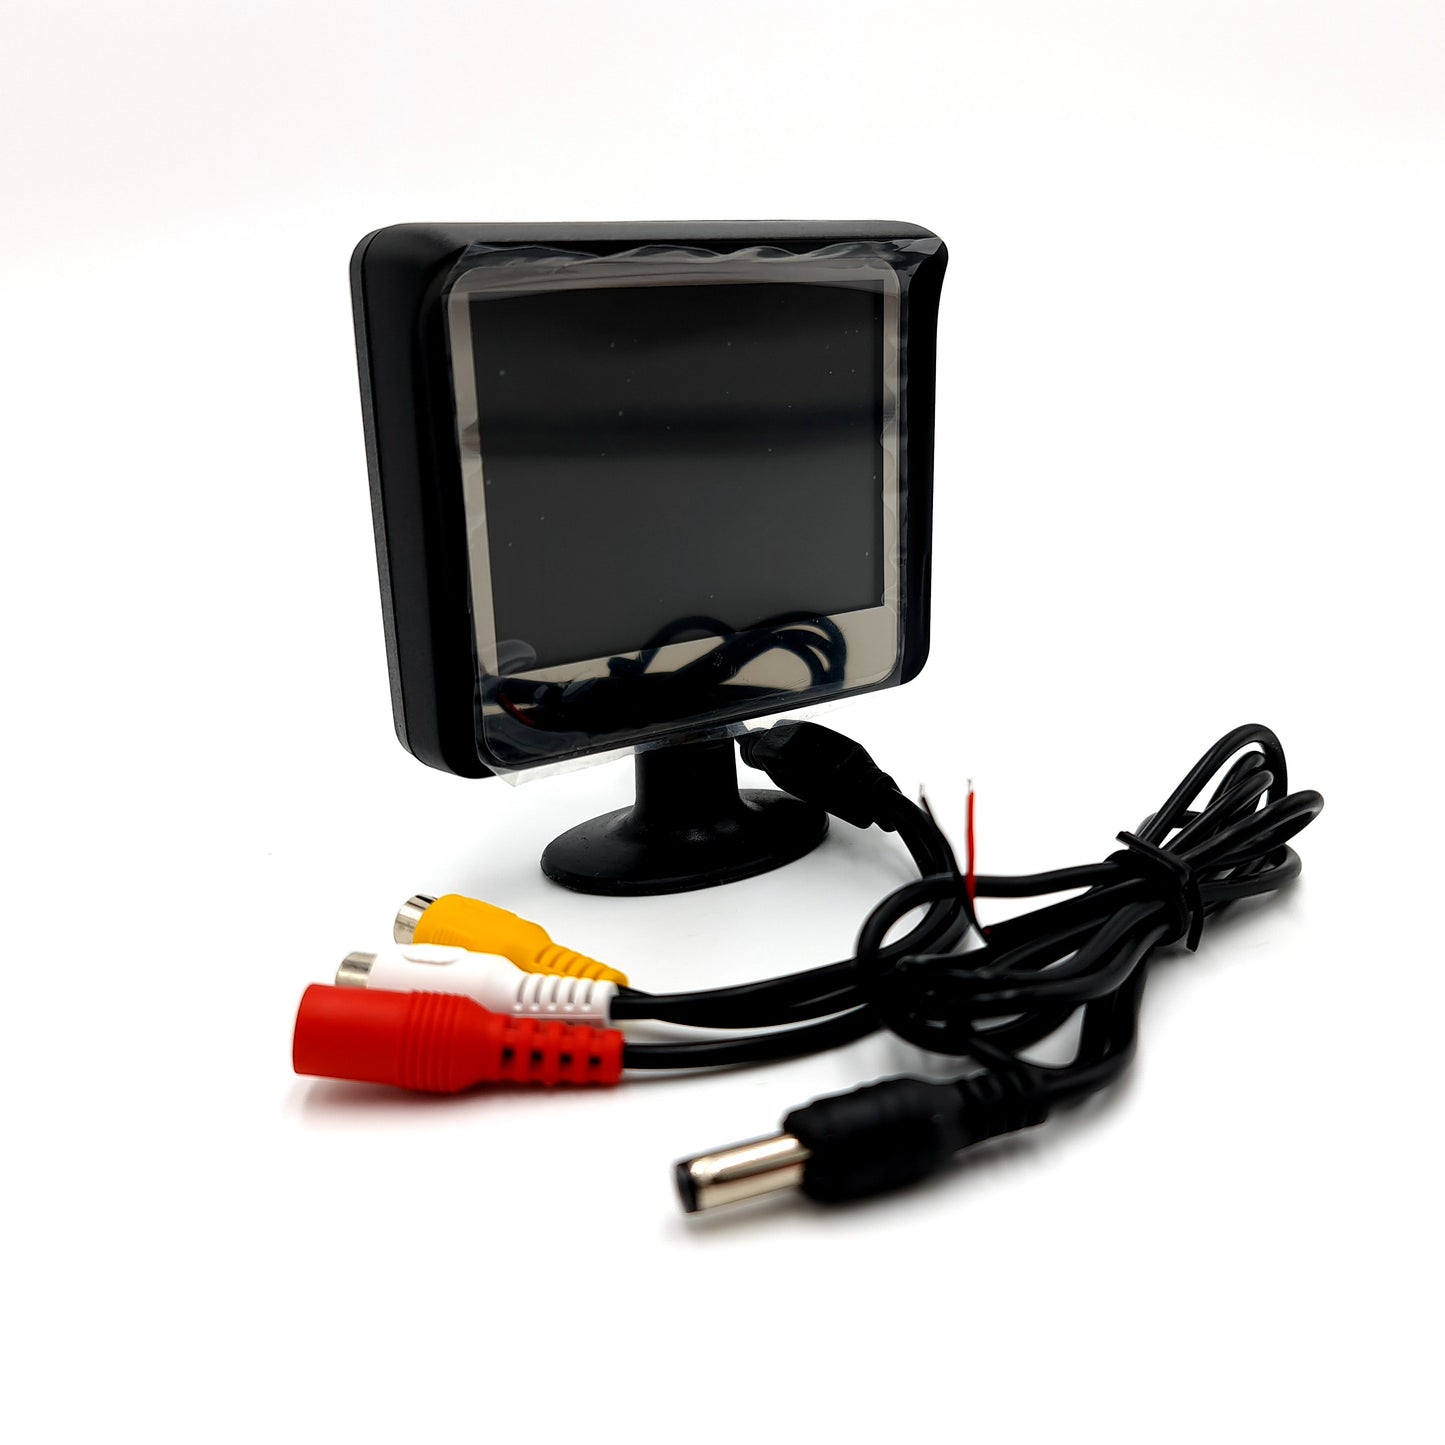 3.5" Colour LCD Monitor with Dual Video Inputs 12v